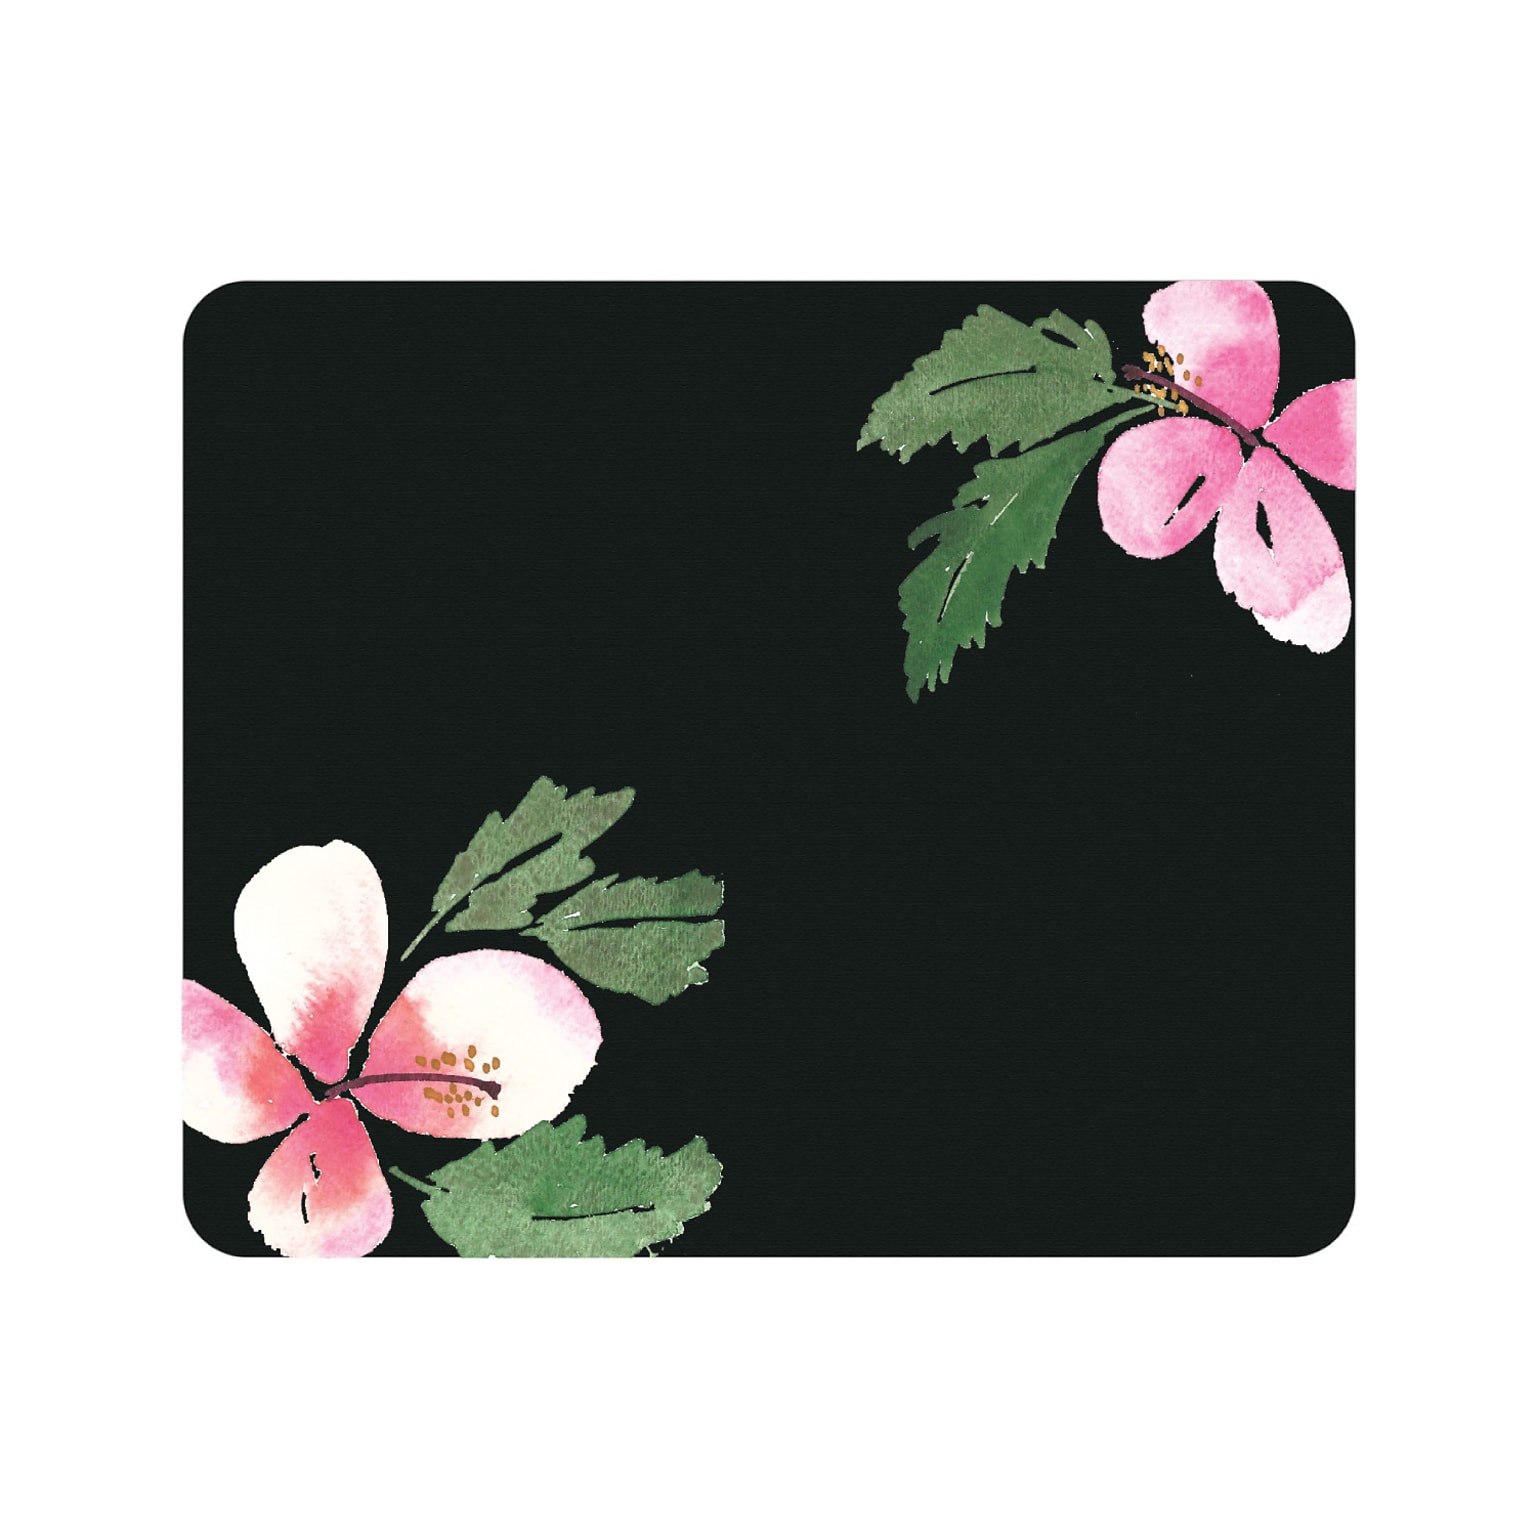 OTM Prints Black Mouse Pad, Hibiscus Pink and Green